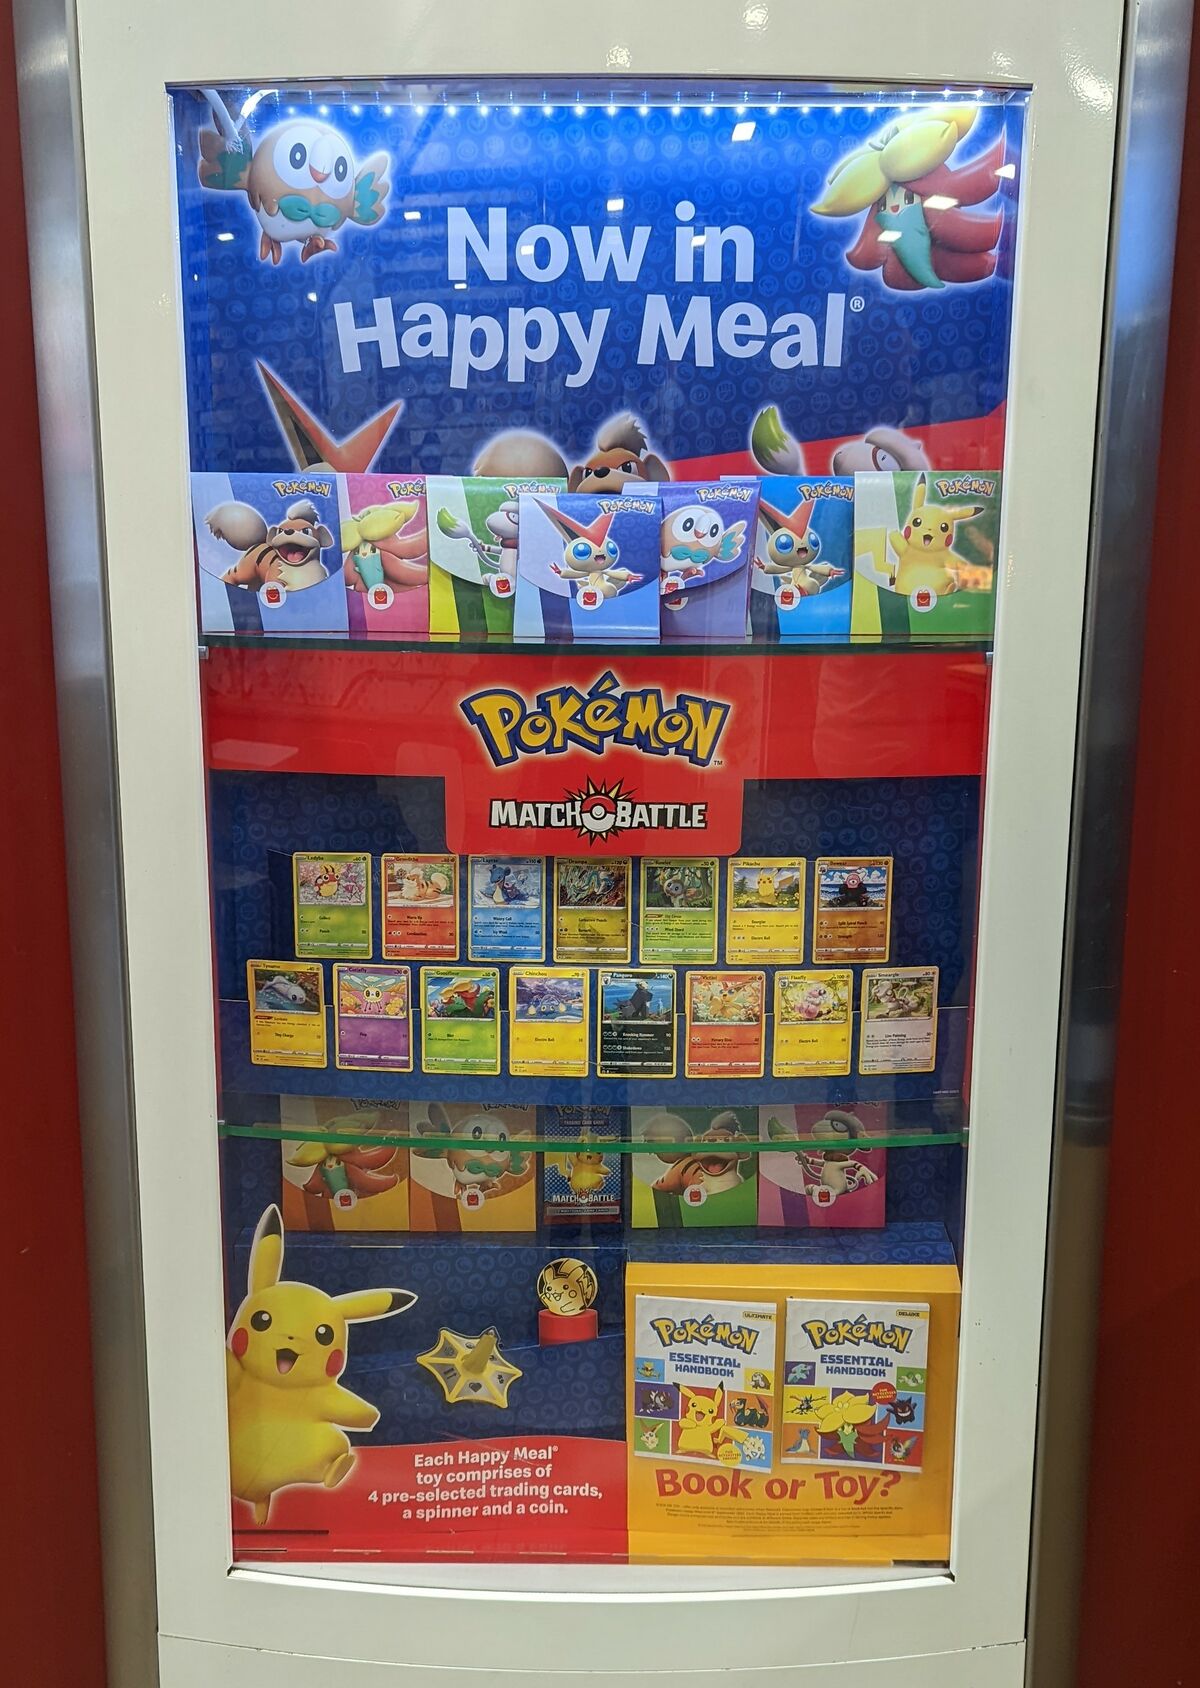 RUN to your Mcdonald's and get the NEW Pokemon trading cards